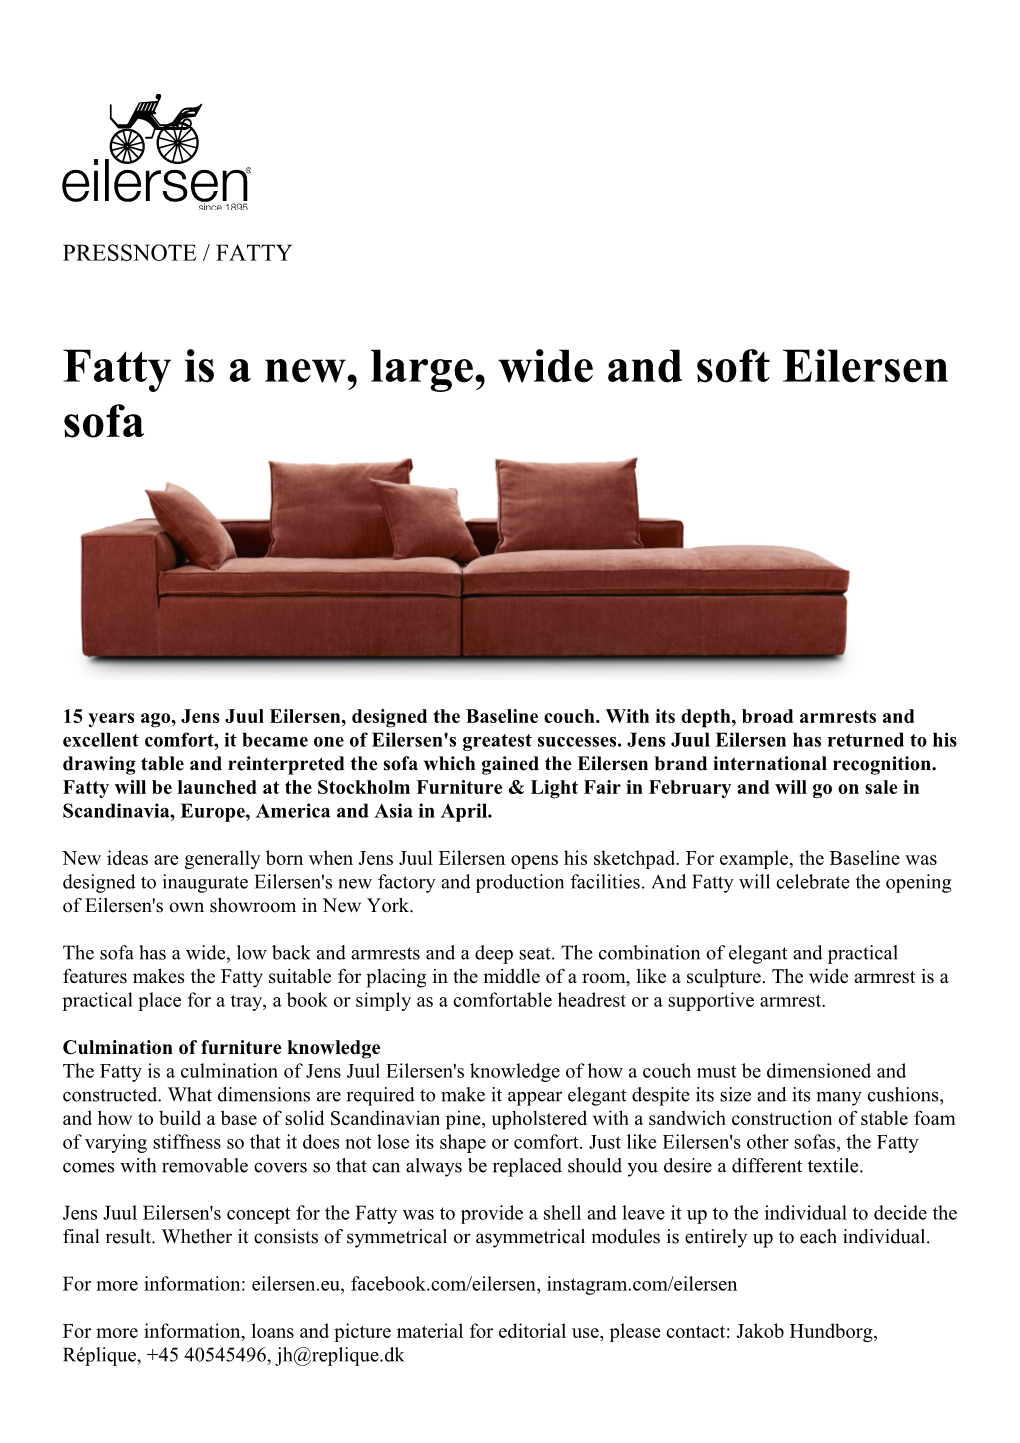 Fatty Is a New, Large, Wide and Soft Eilersen Sofa